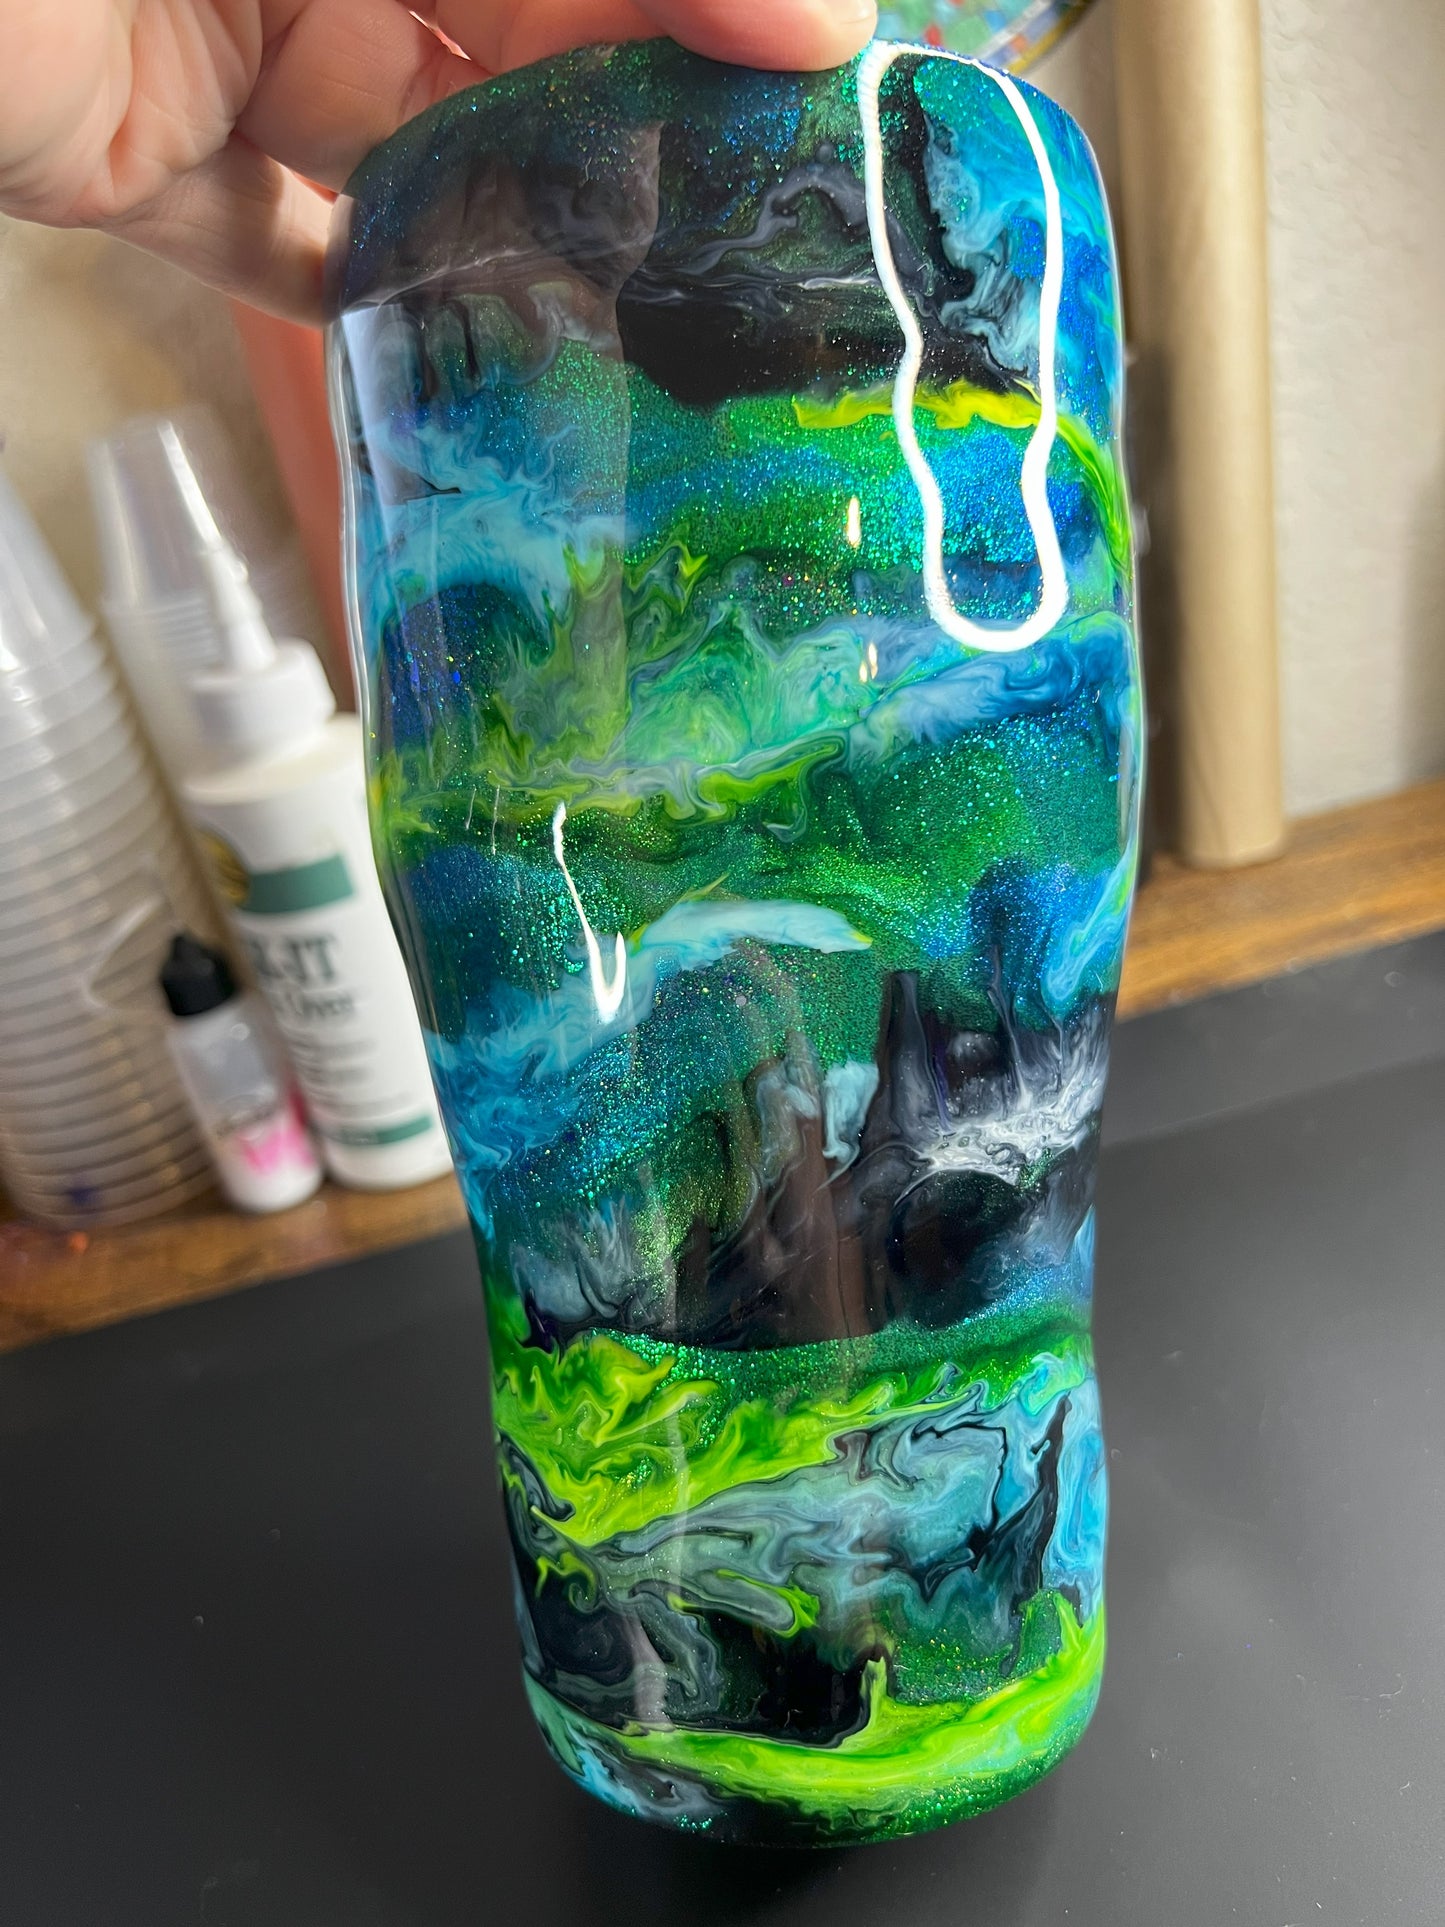 Chameleon Base with Blue and Green Swirl #0021